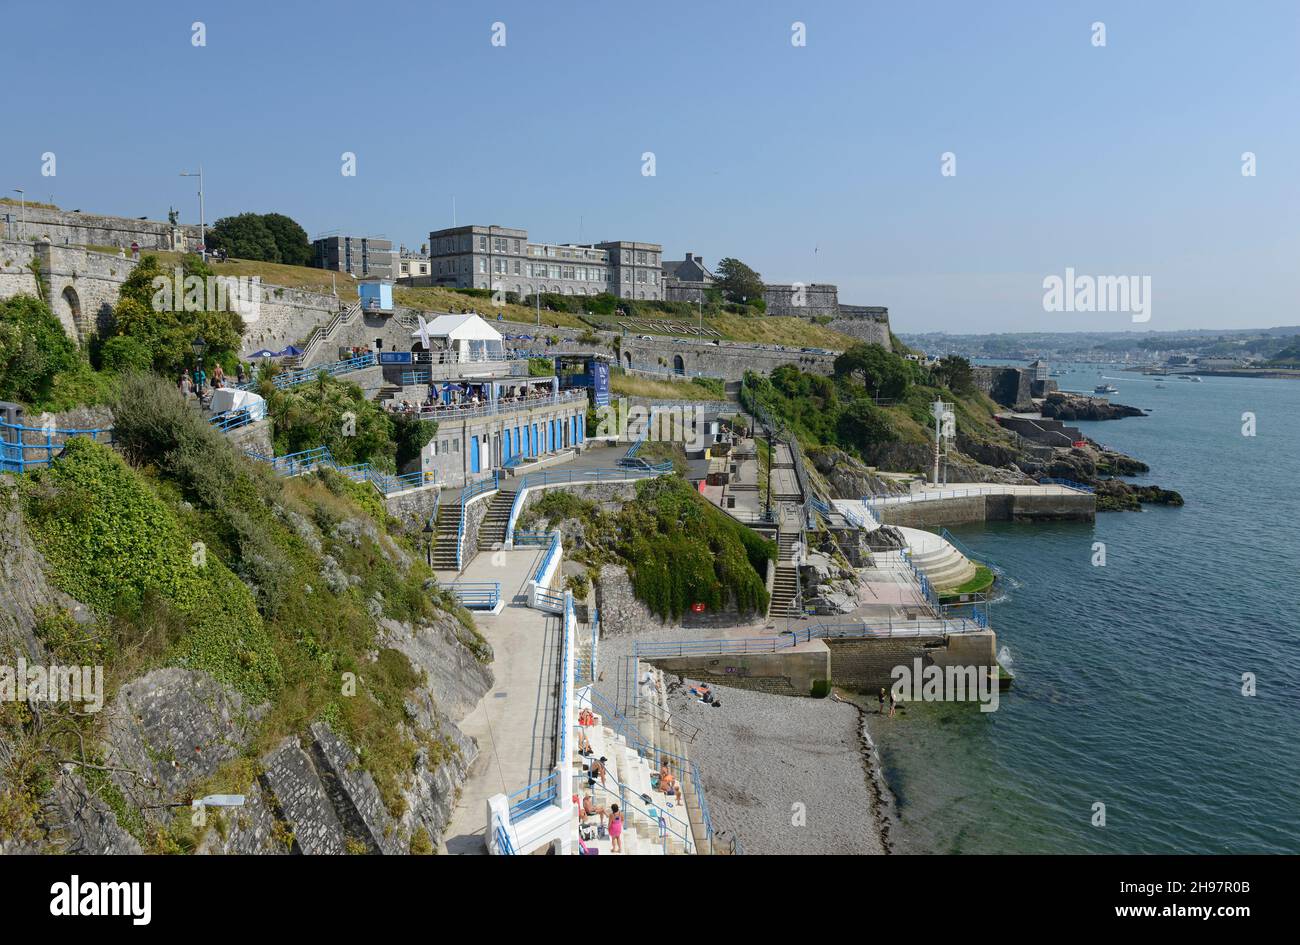 View of the seafront at Plymouth, Devon, UK with the Marine Biological Association buildings on the cliff above. Stock Photo